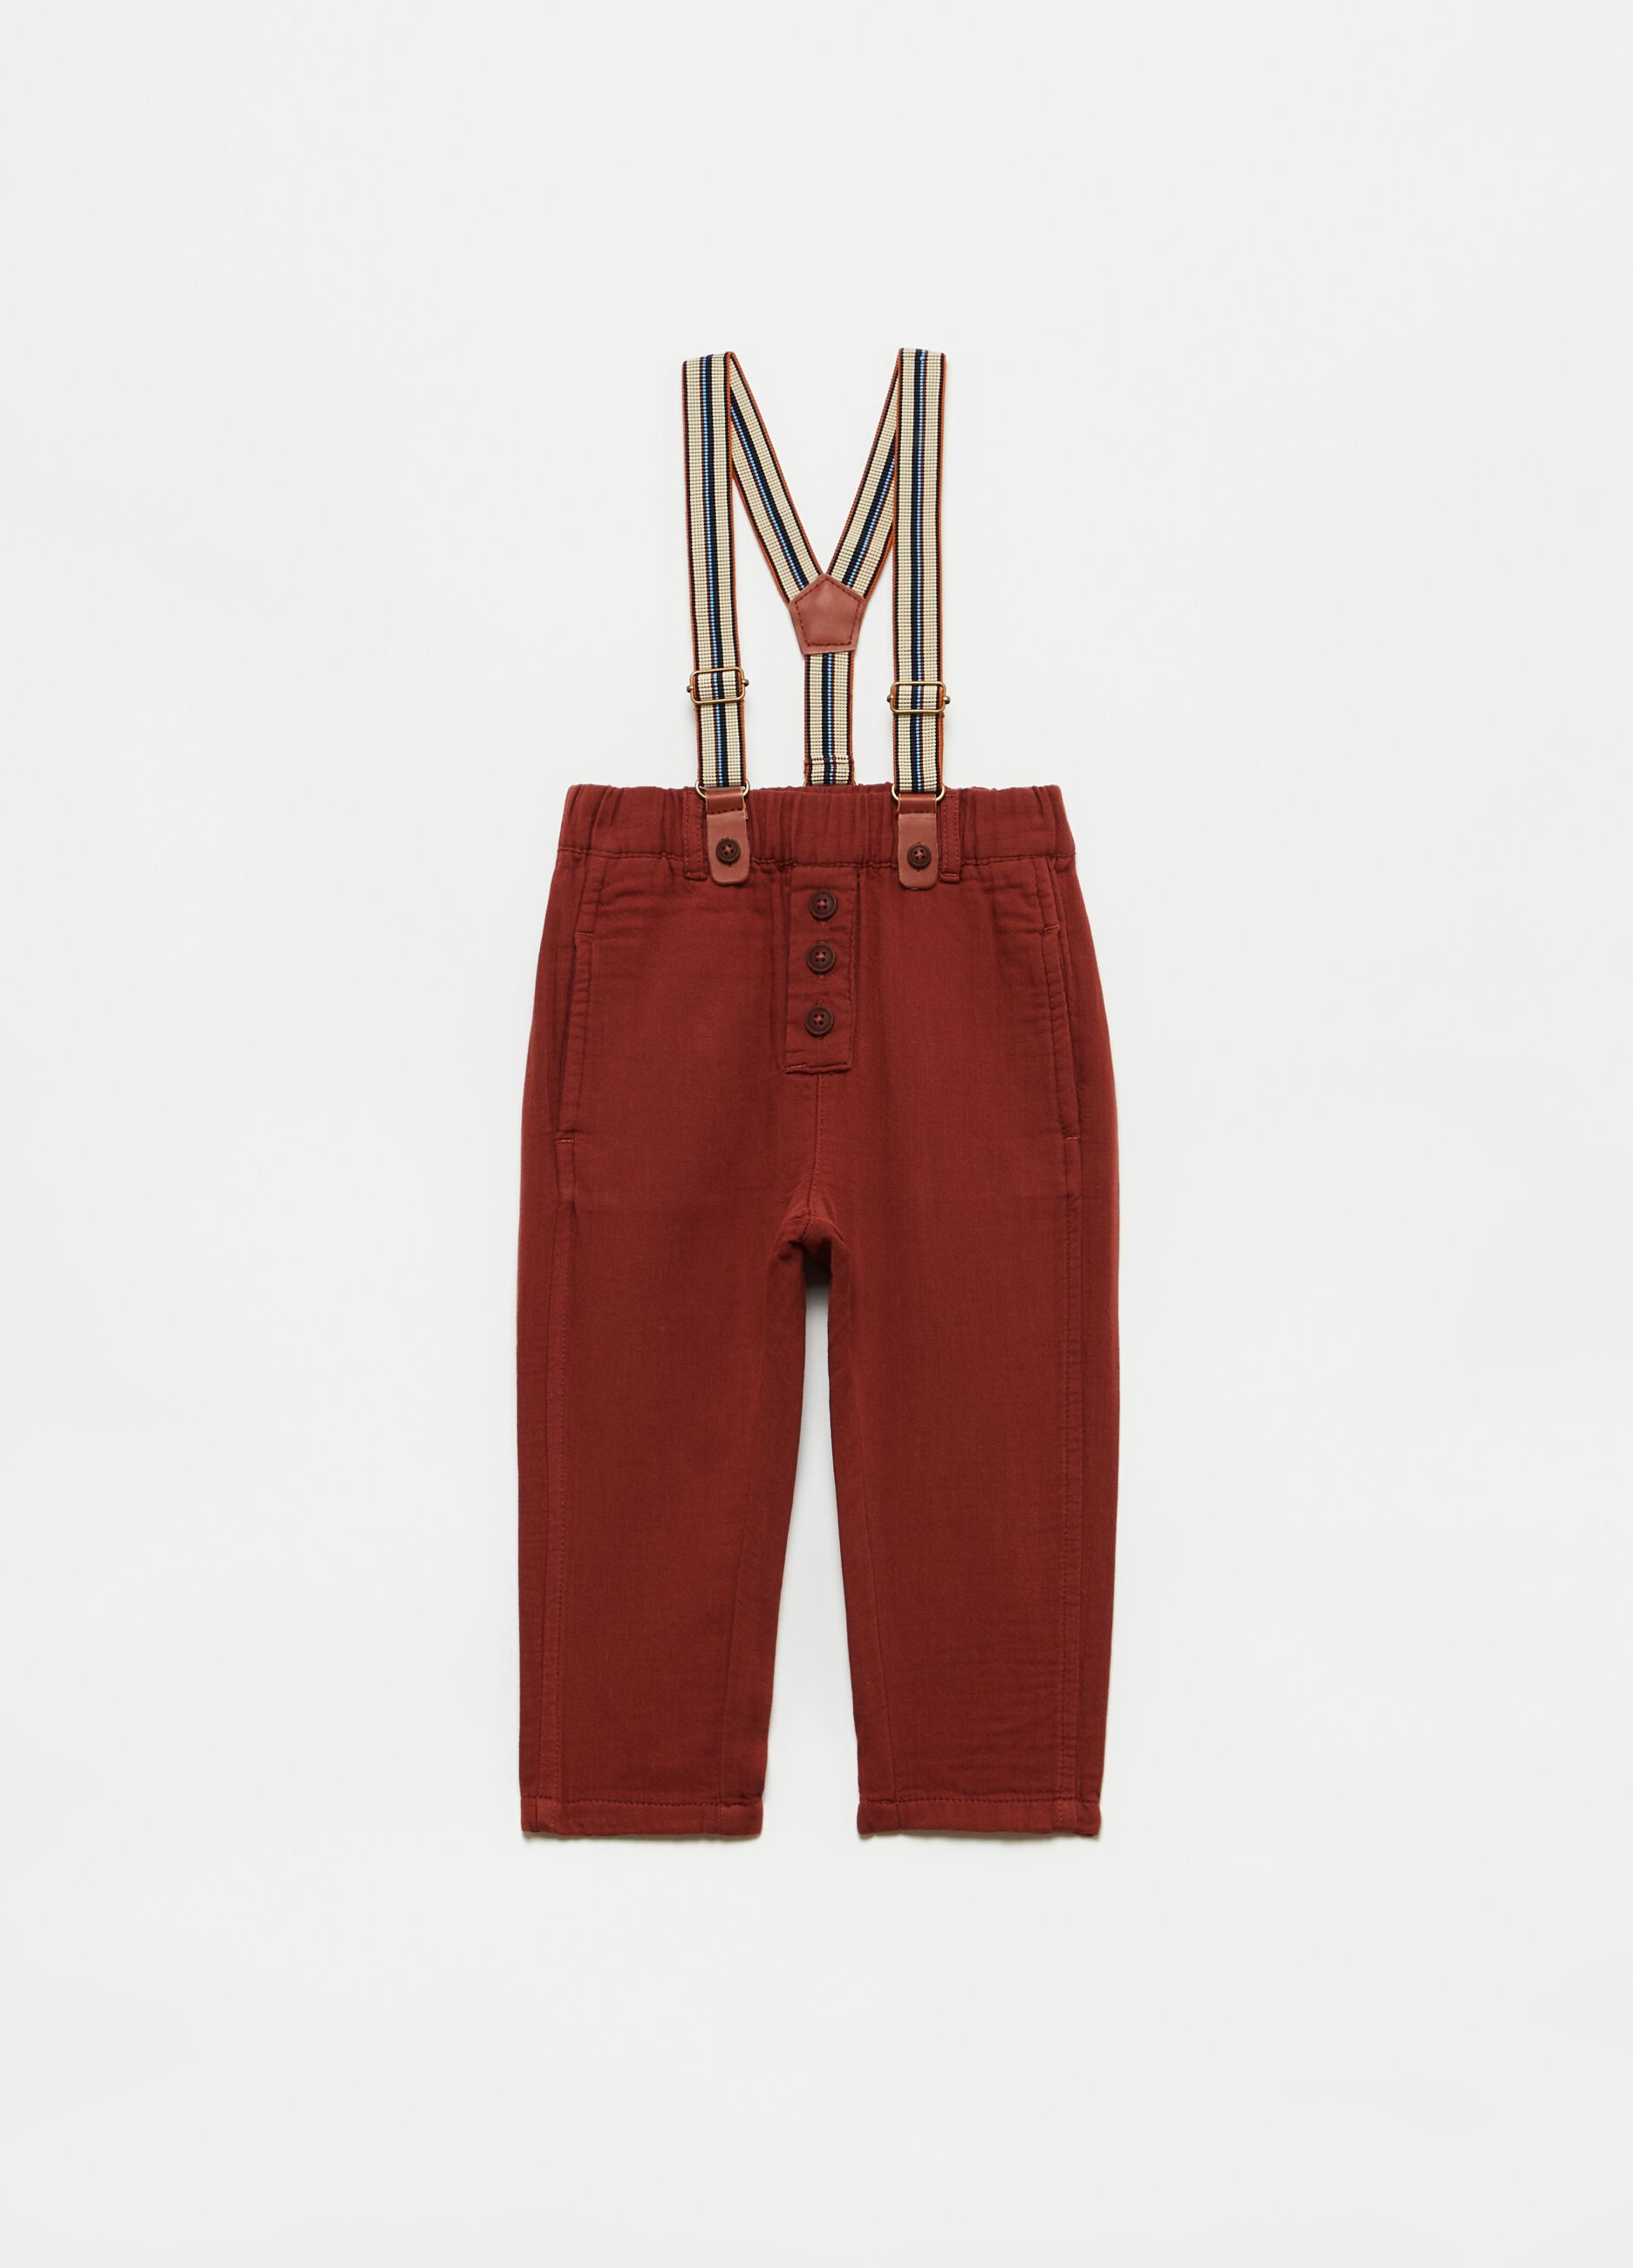 Cotton trousers with braces